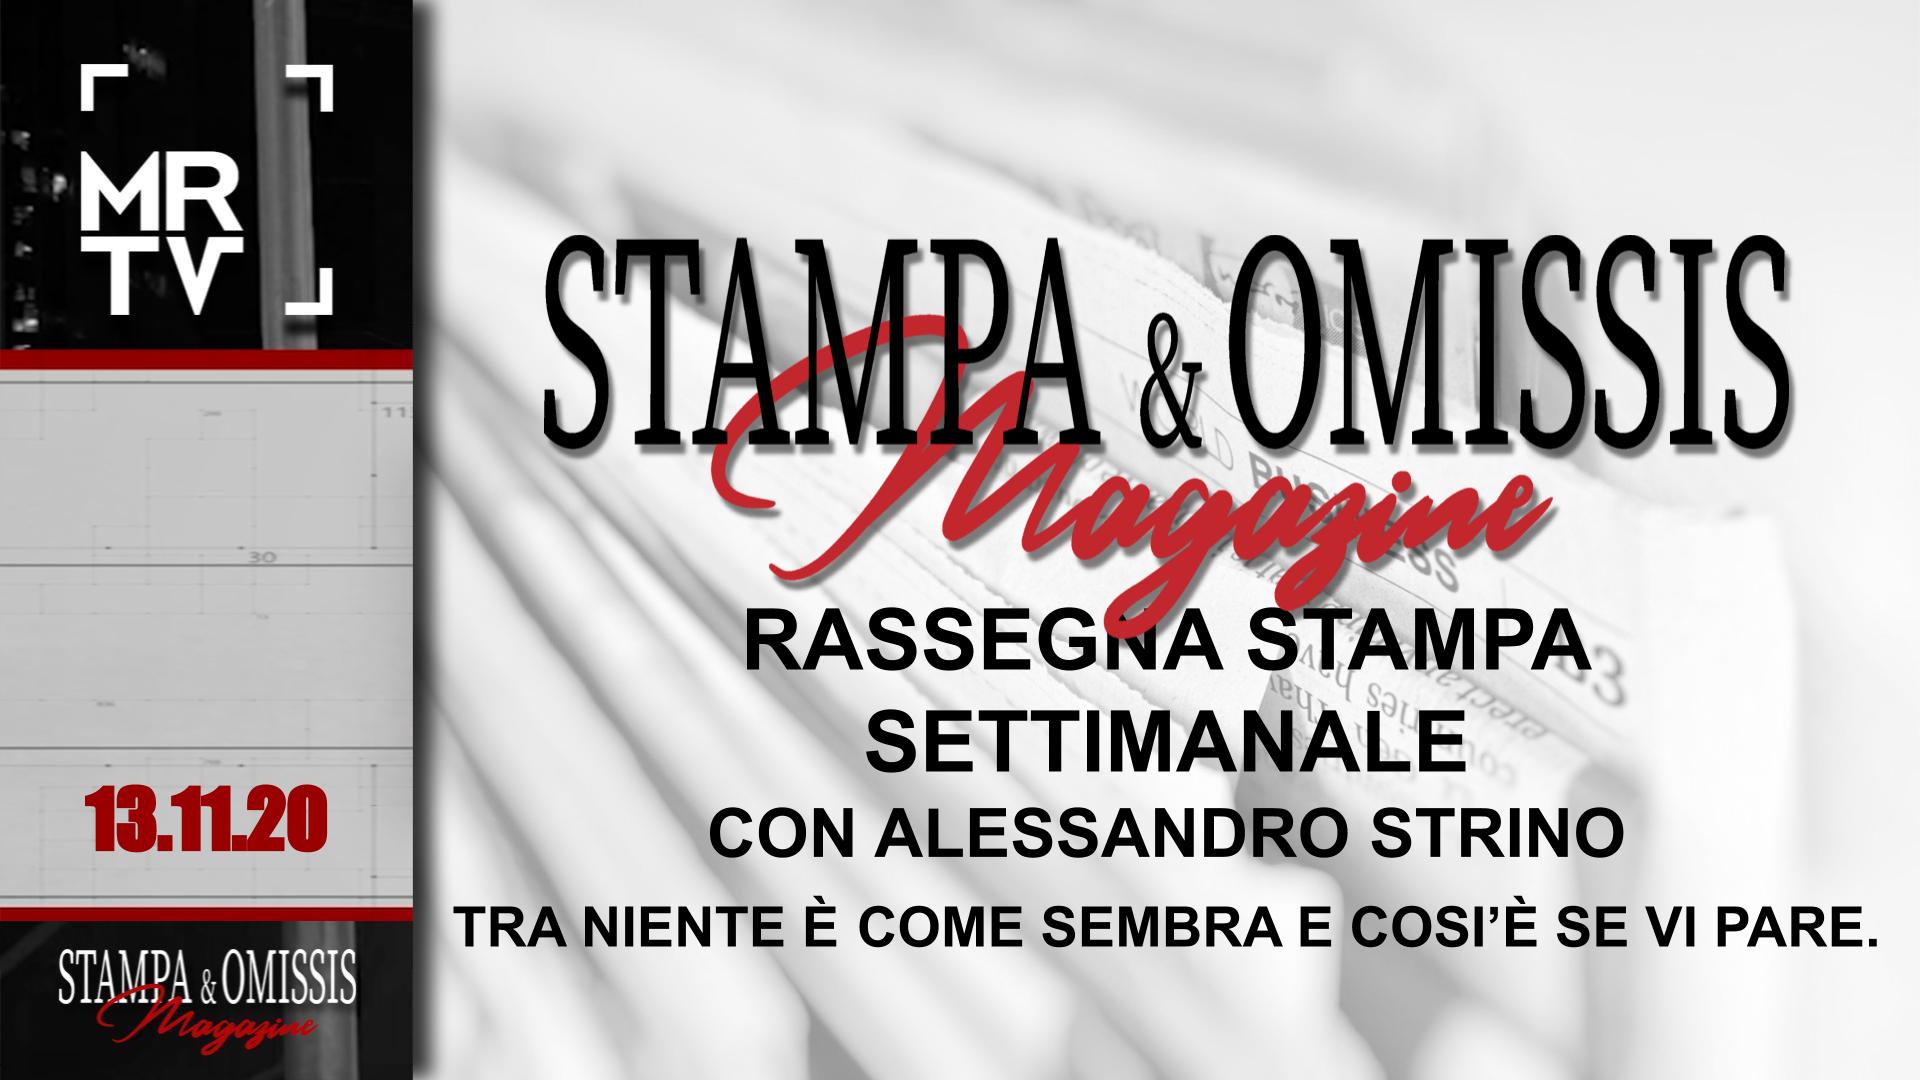 STAMPA OMISSIS1311 4e247